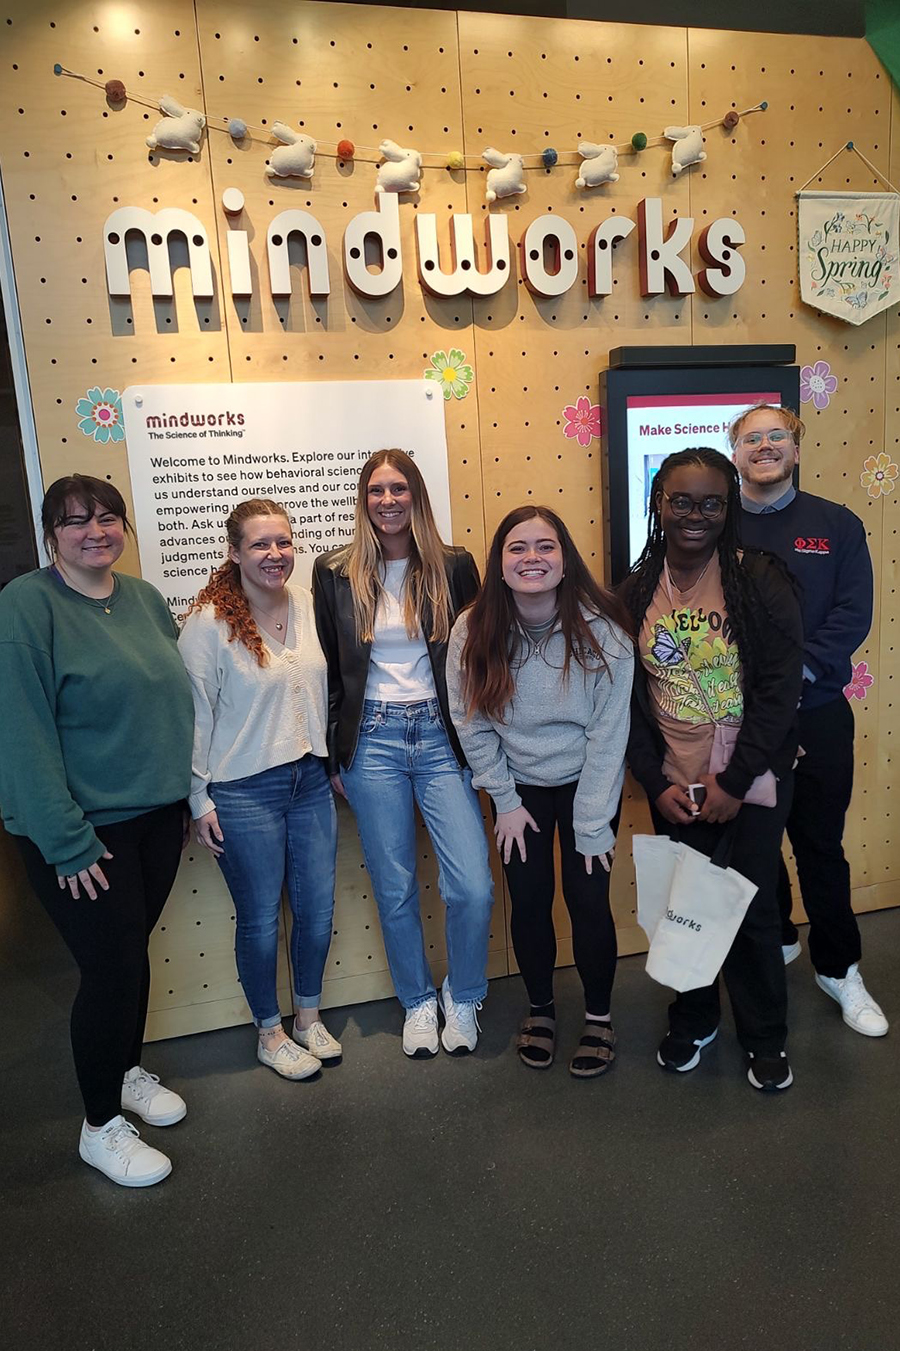 In addition to attending a conference, Northwest psychology students visited Mindworks, a Chicago discovery center and behavioral science lab. 